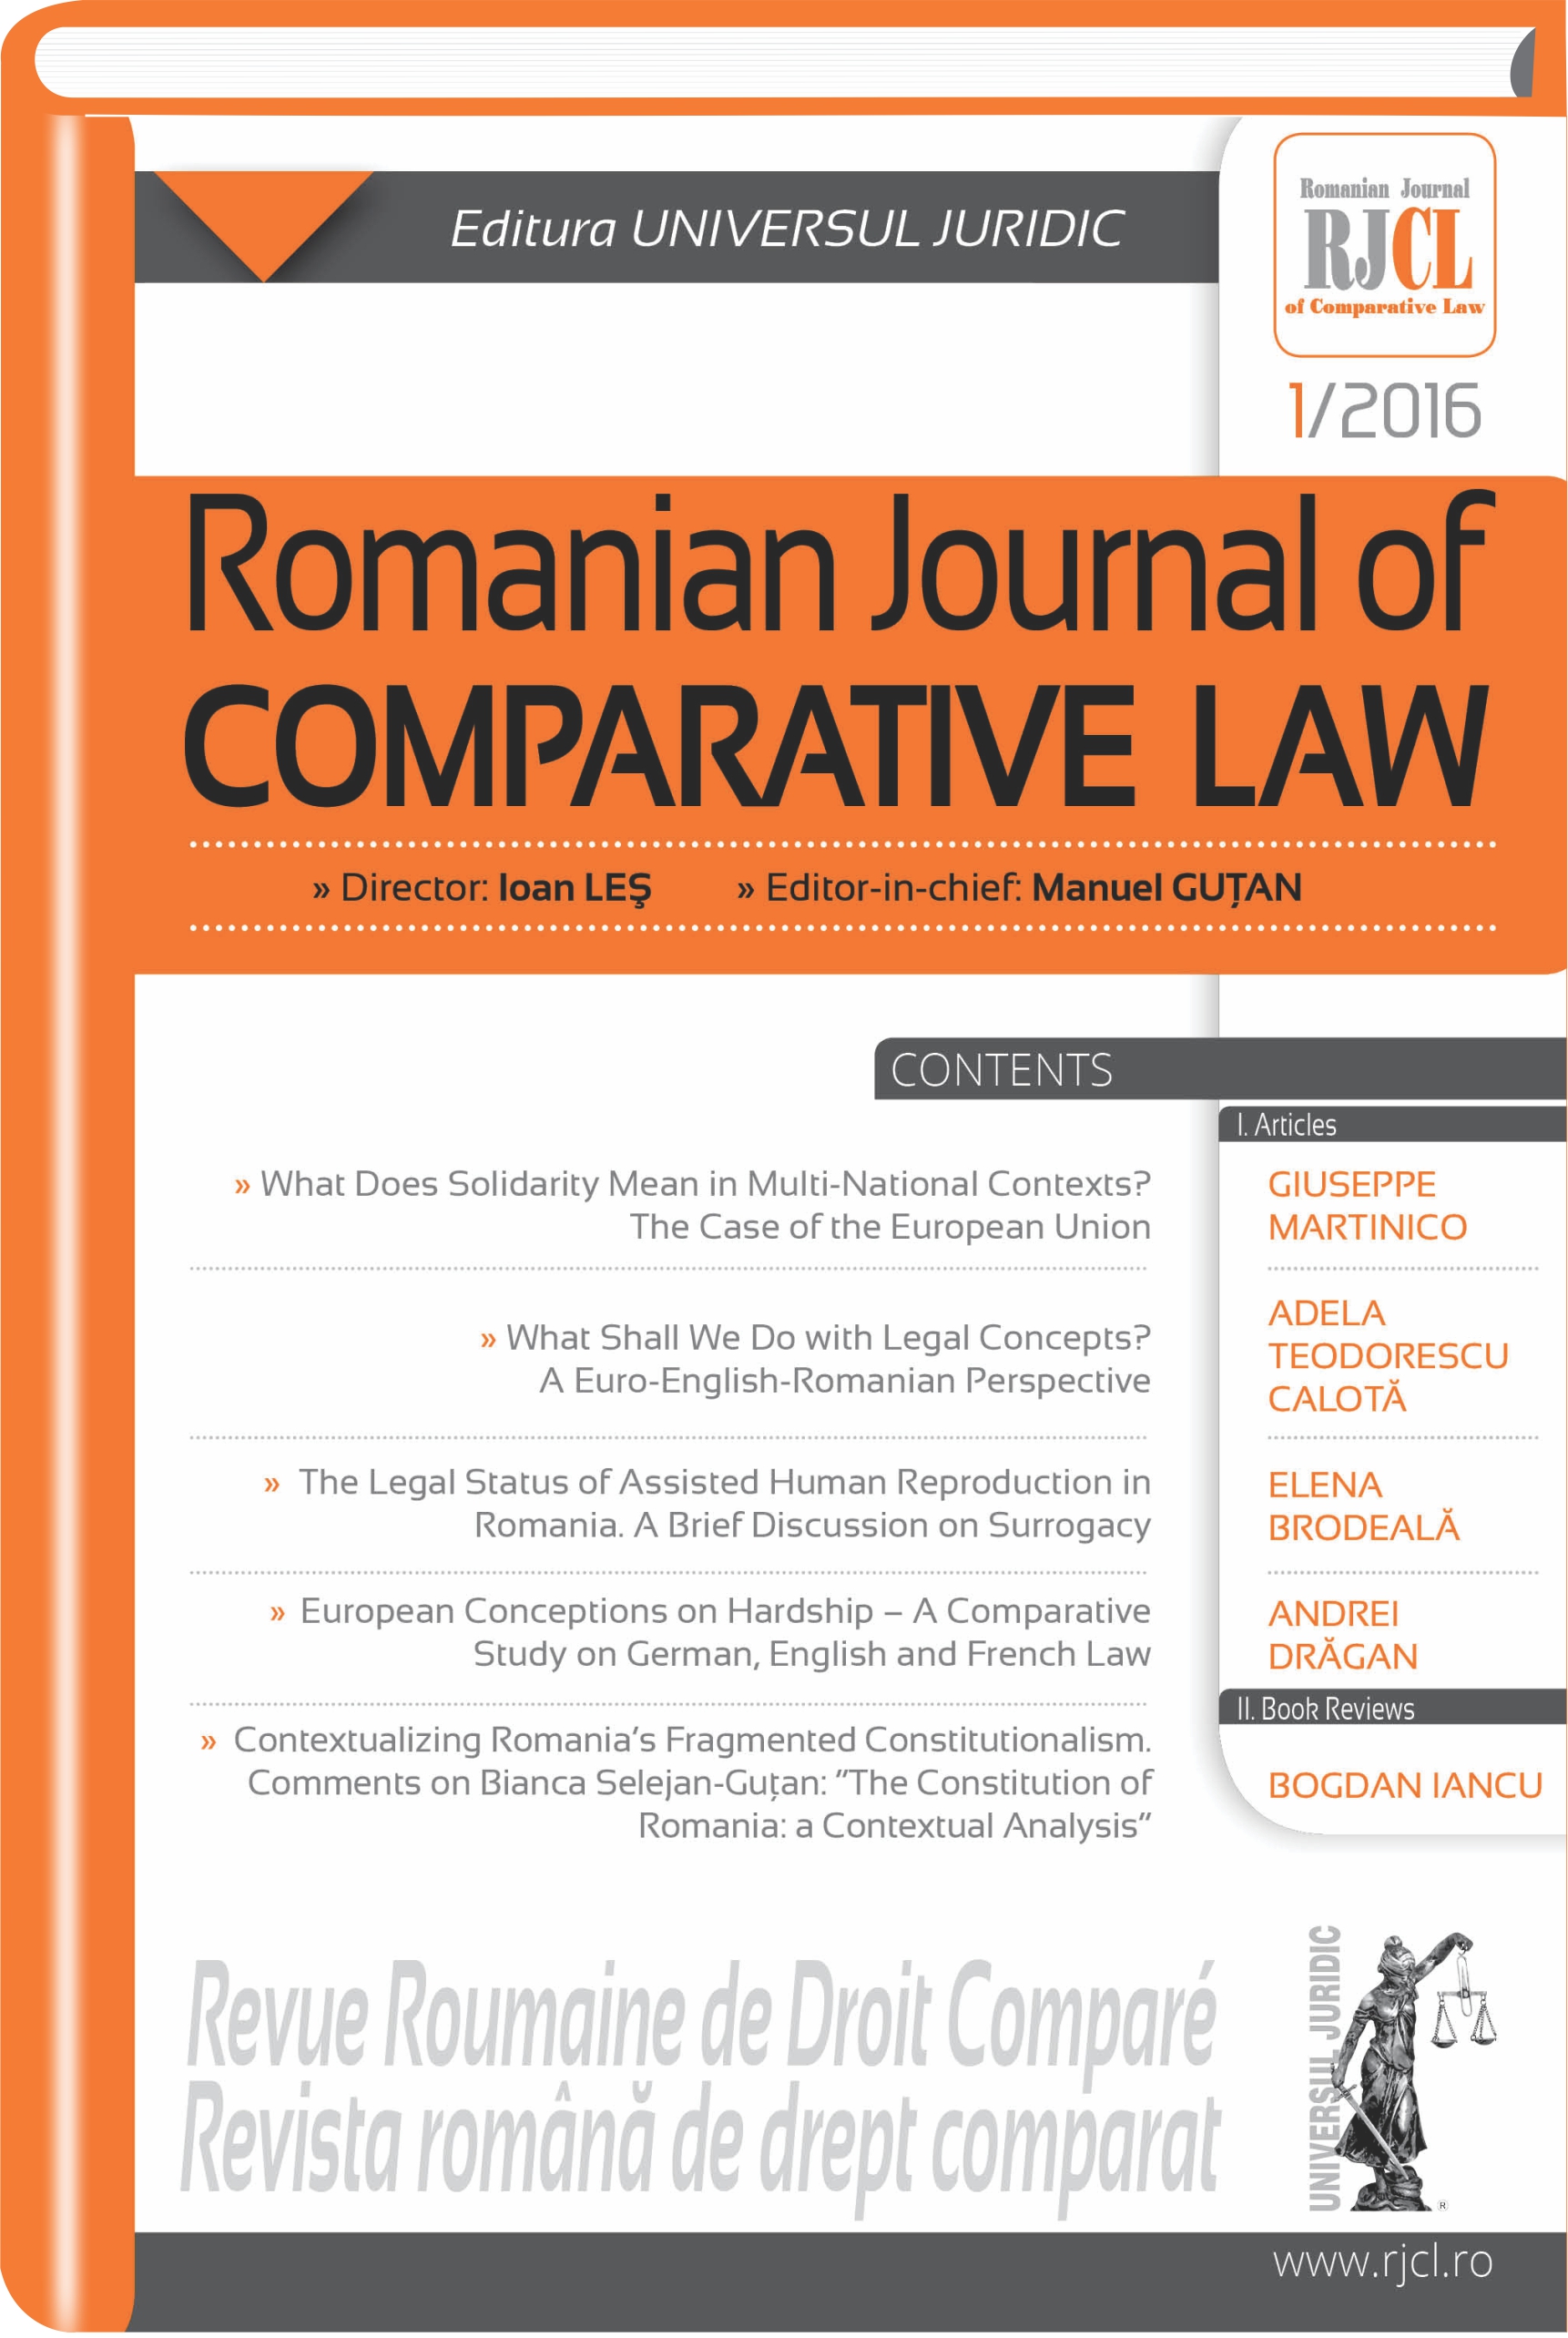 European Conceptions on Hardship – A Comparative Study on German, English and French Law